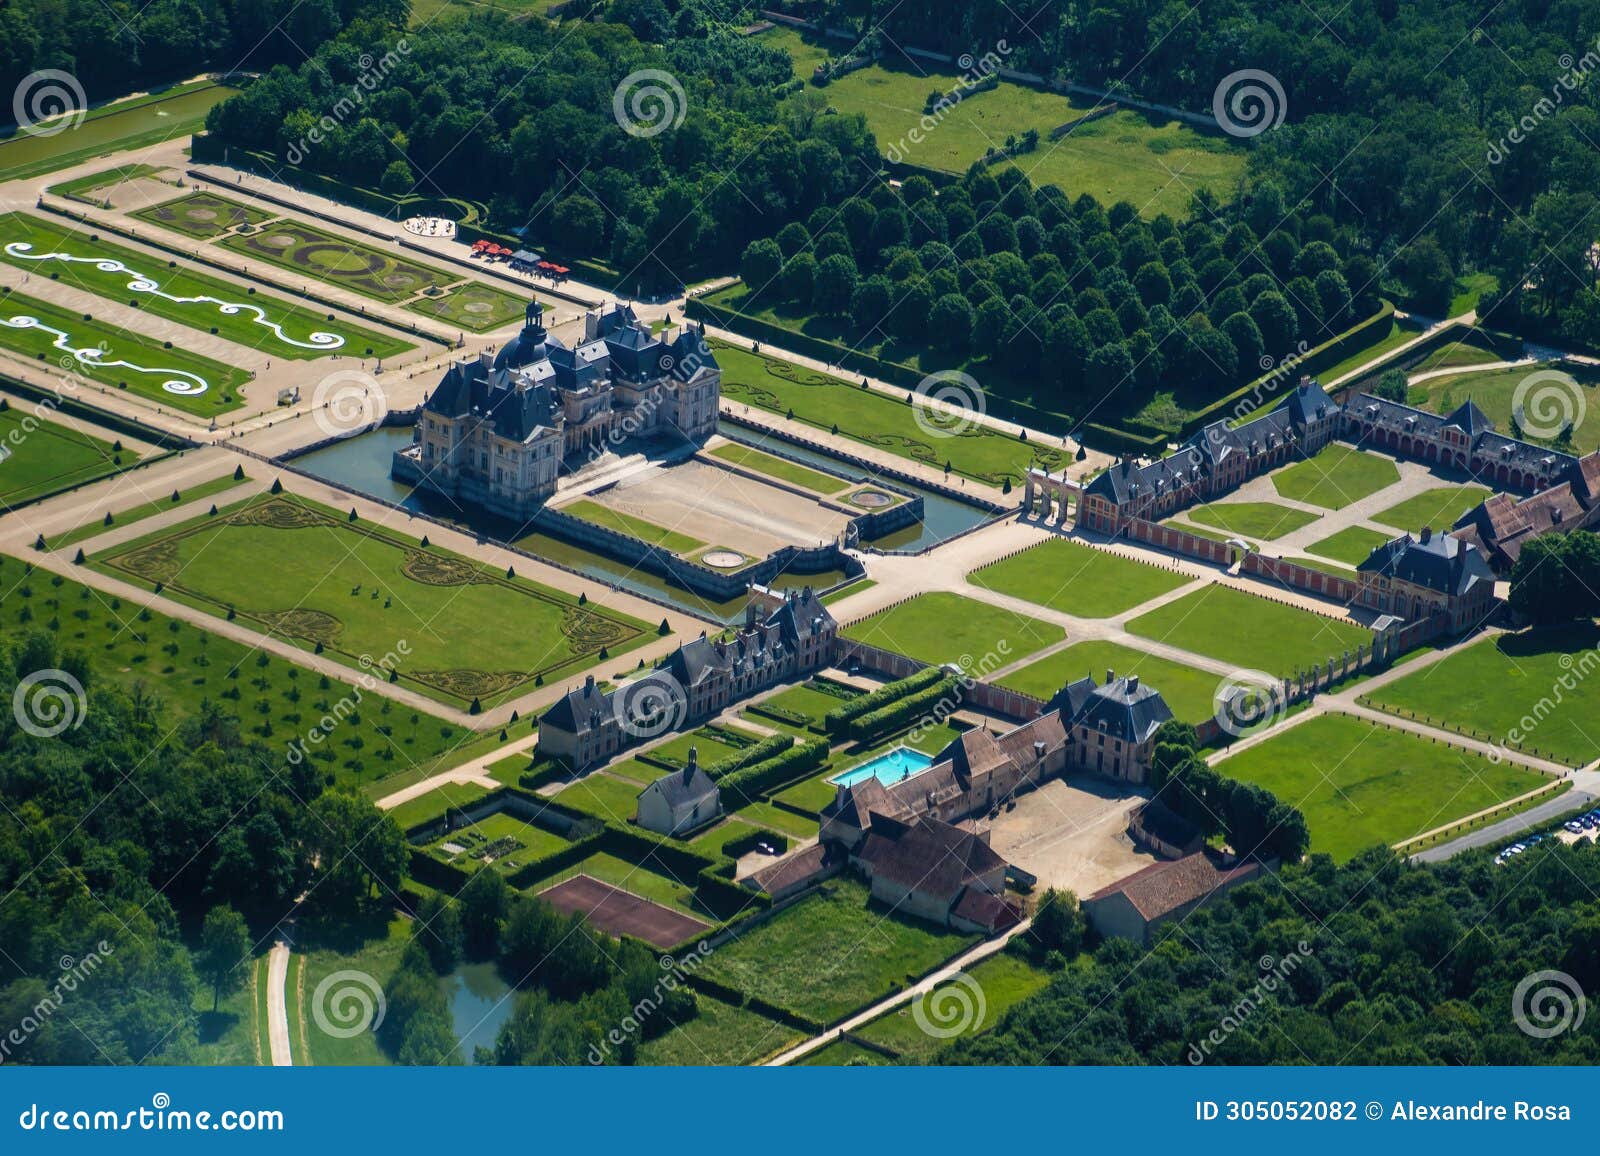 aerial view of the castle and gardens of vaux le vicomte near paris, france